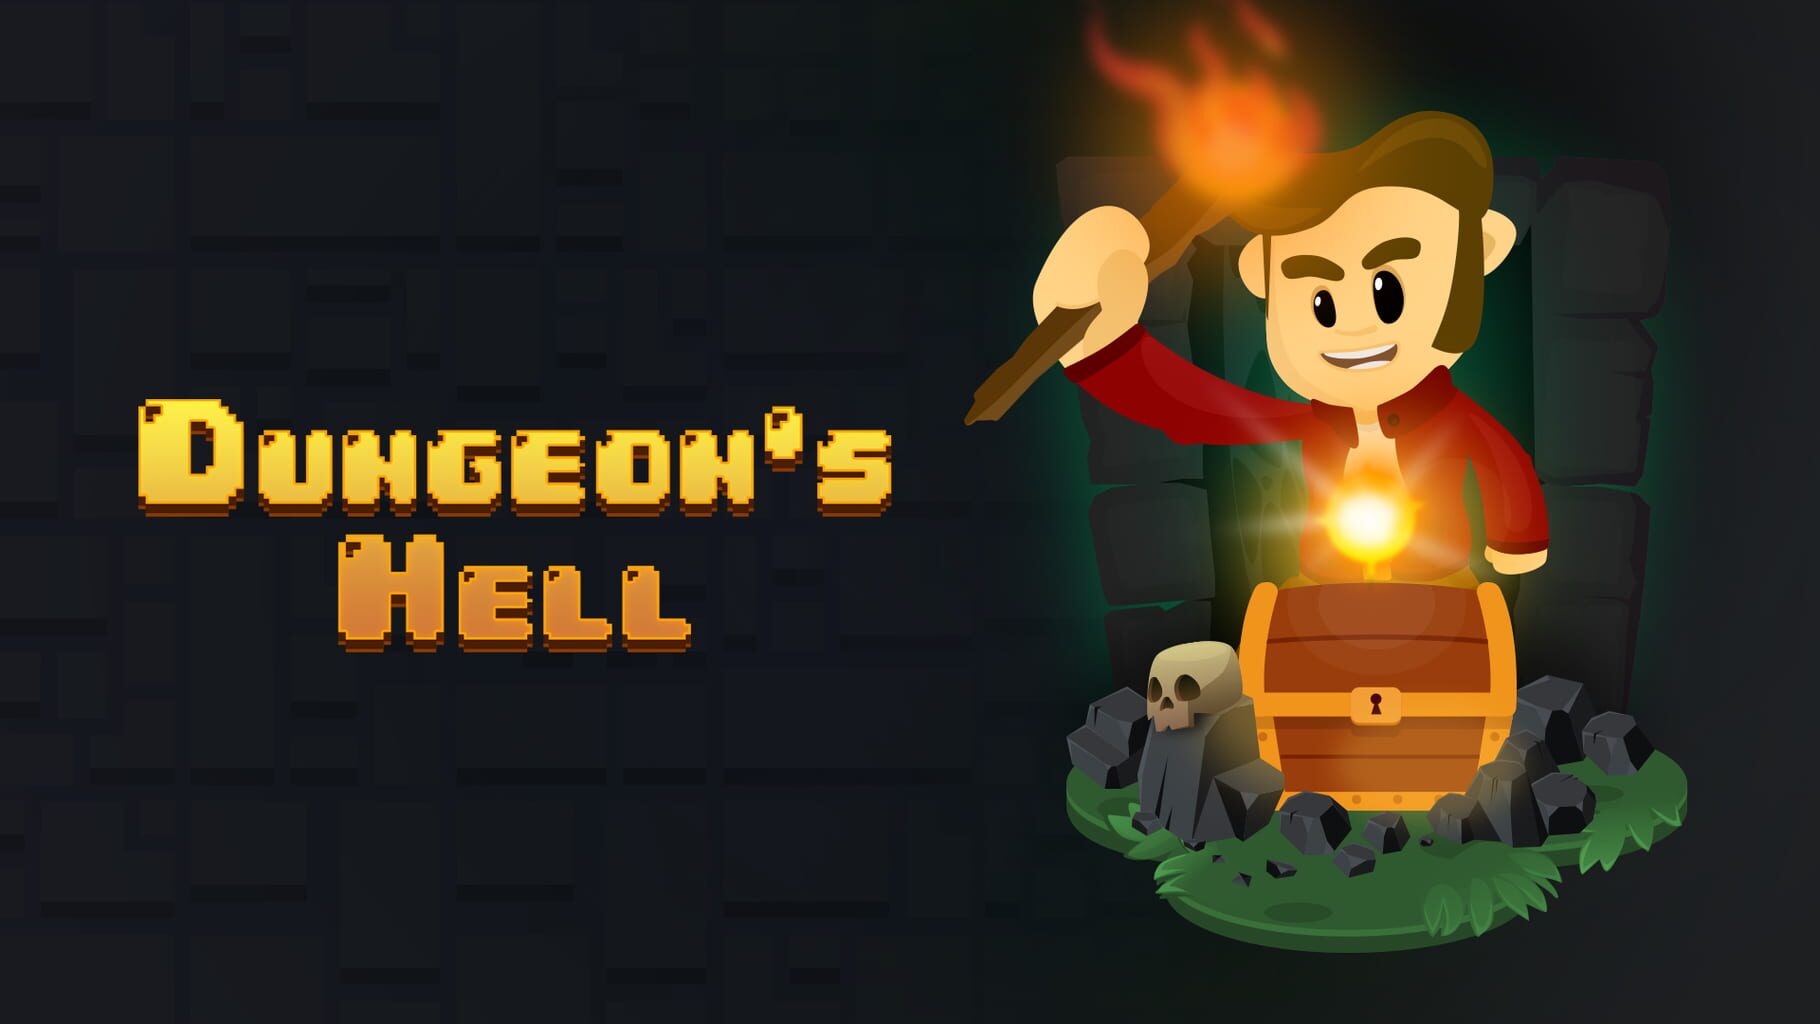 Dungeon's Hell artwork